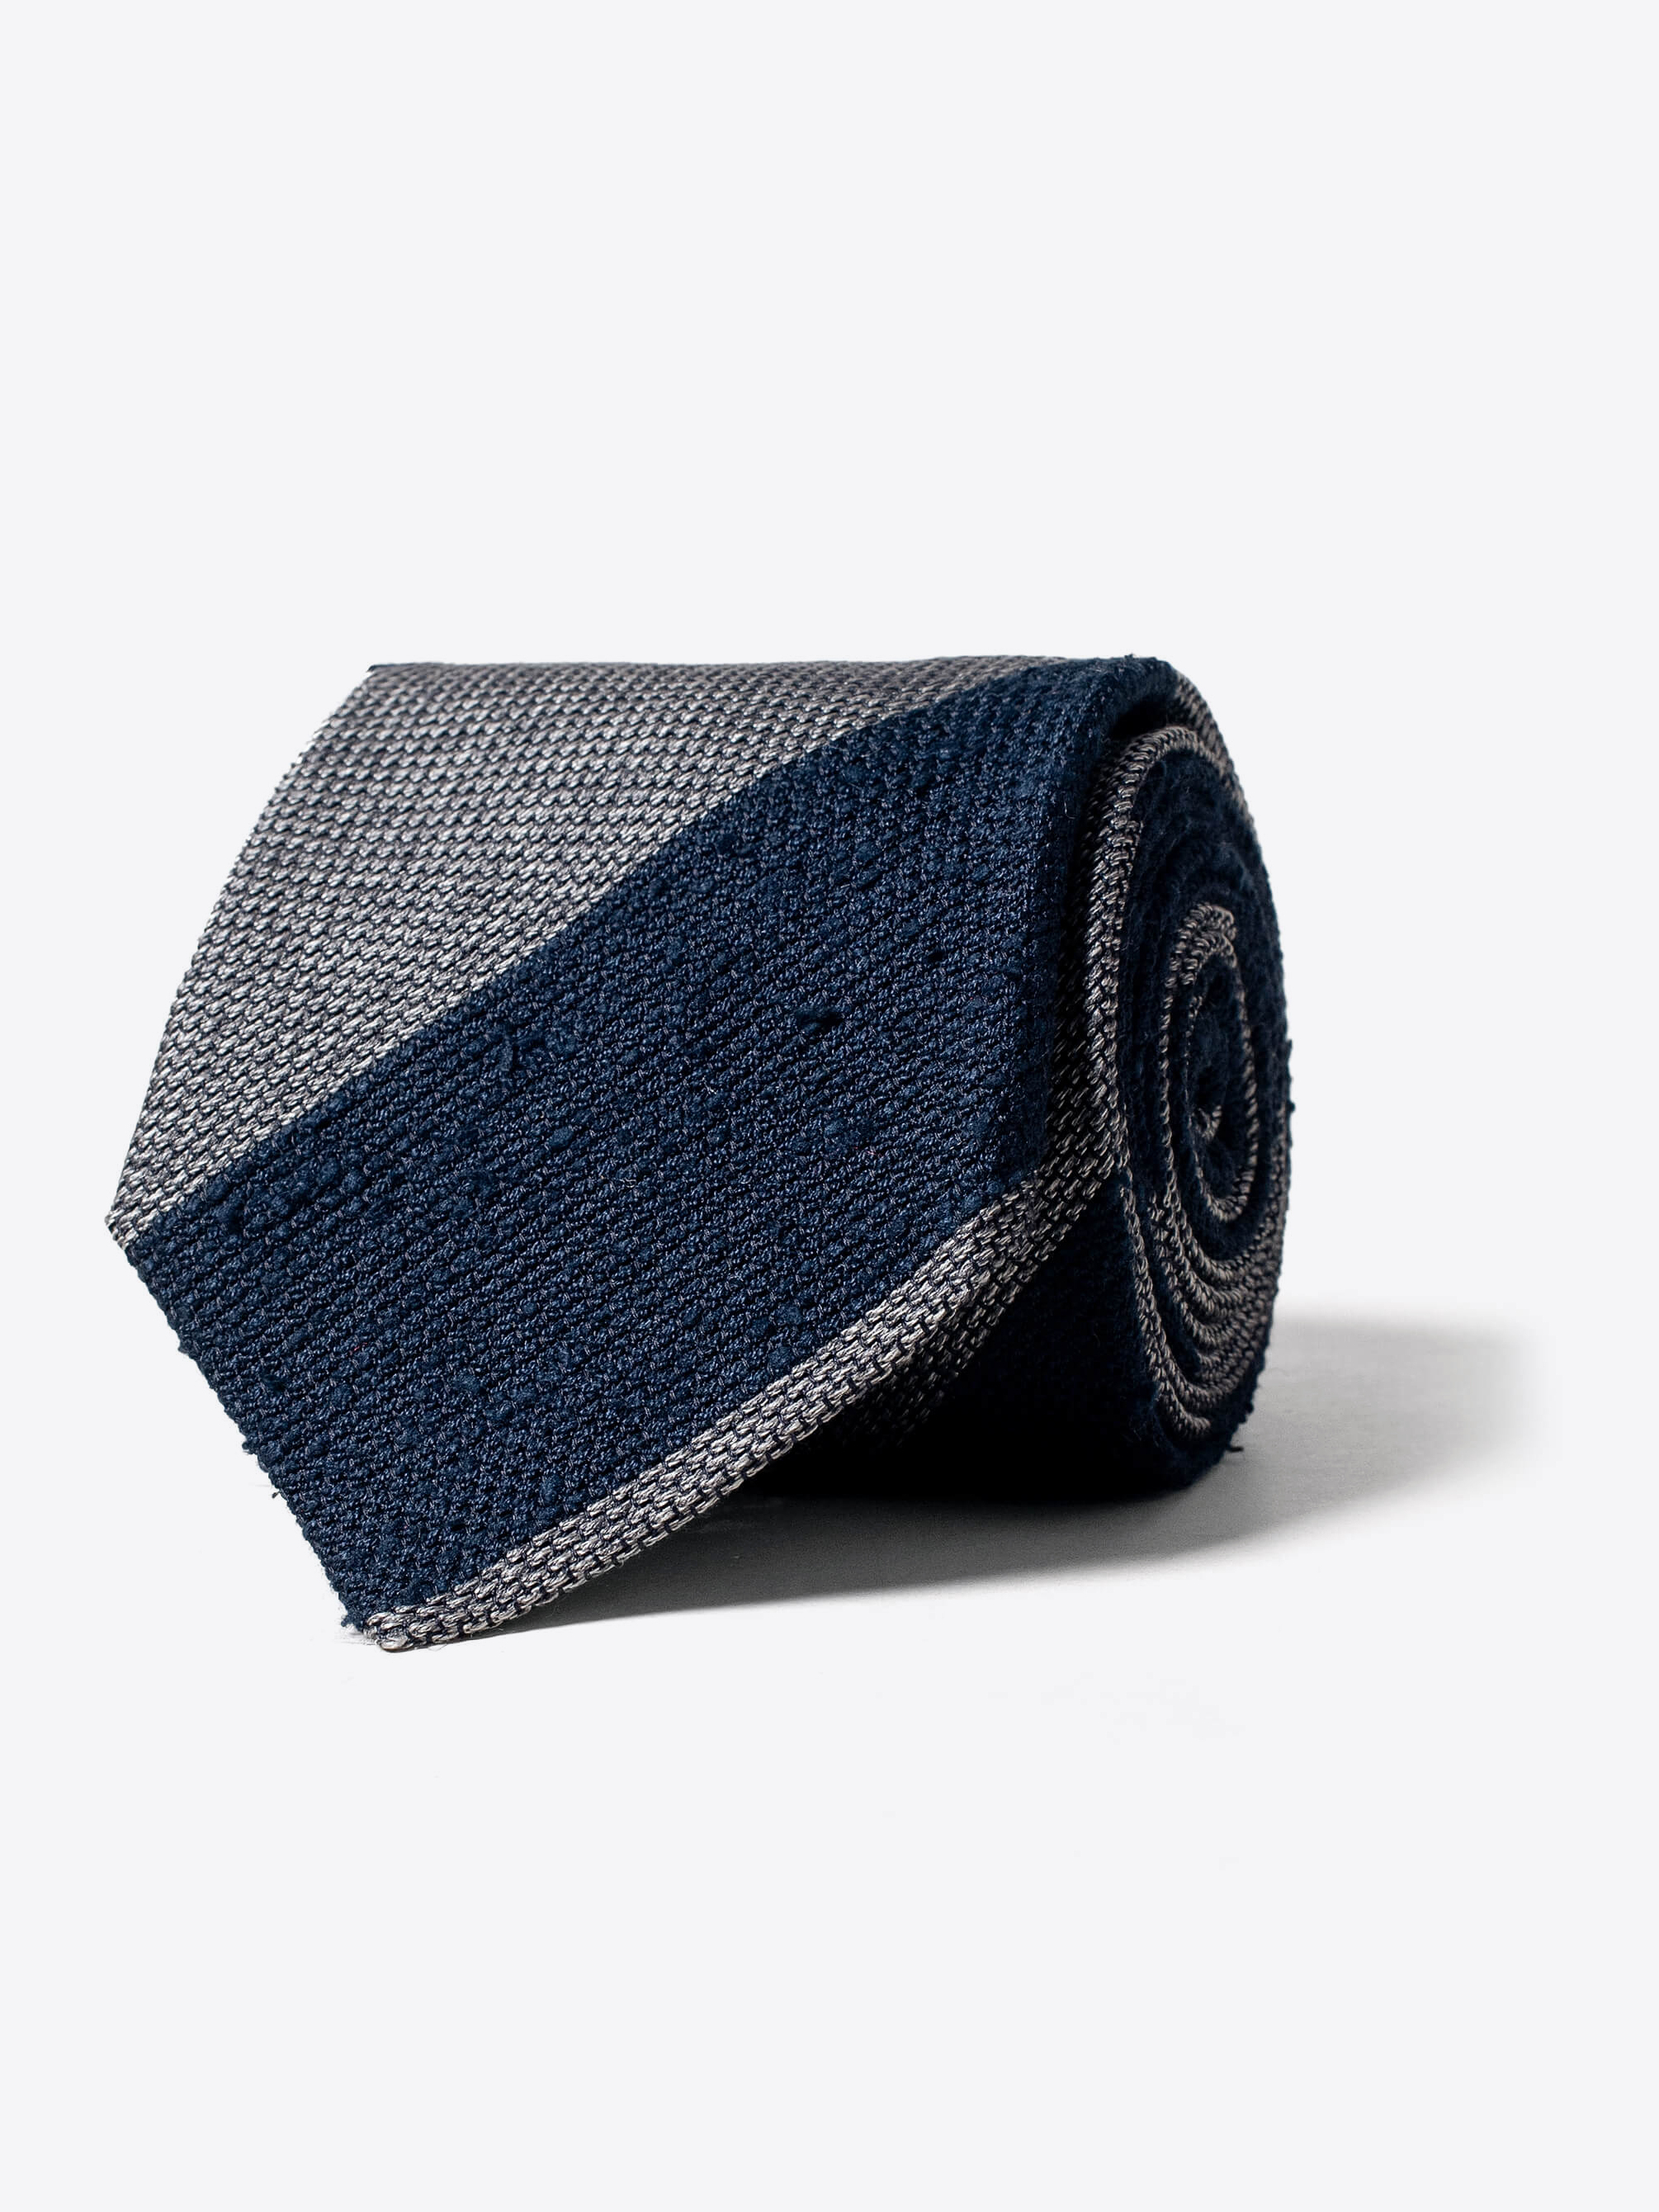 Zoom Image of Navy and Grey Striped Shantung Grenadine Tie